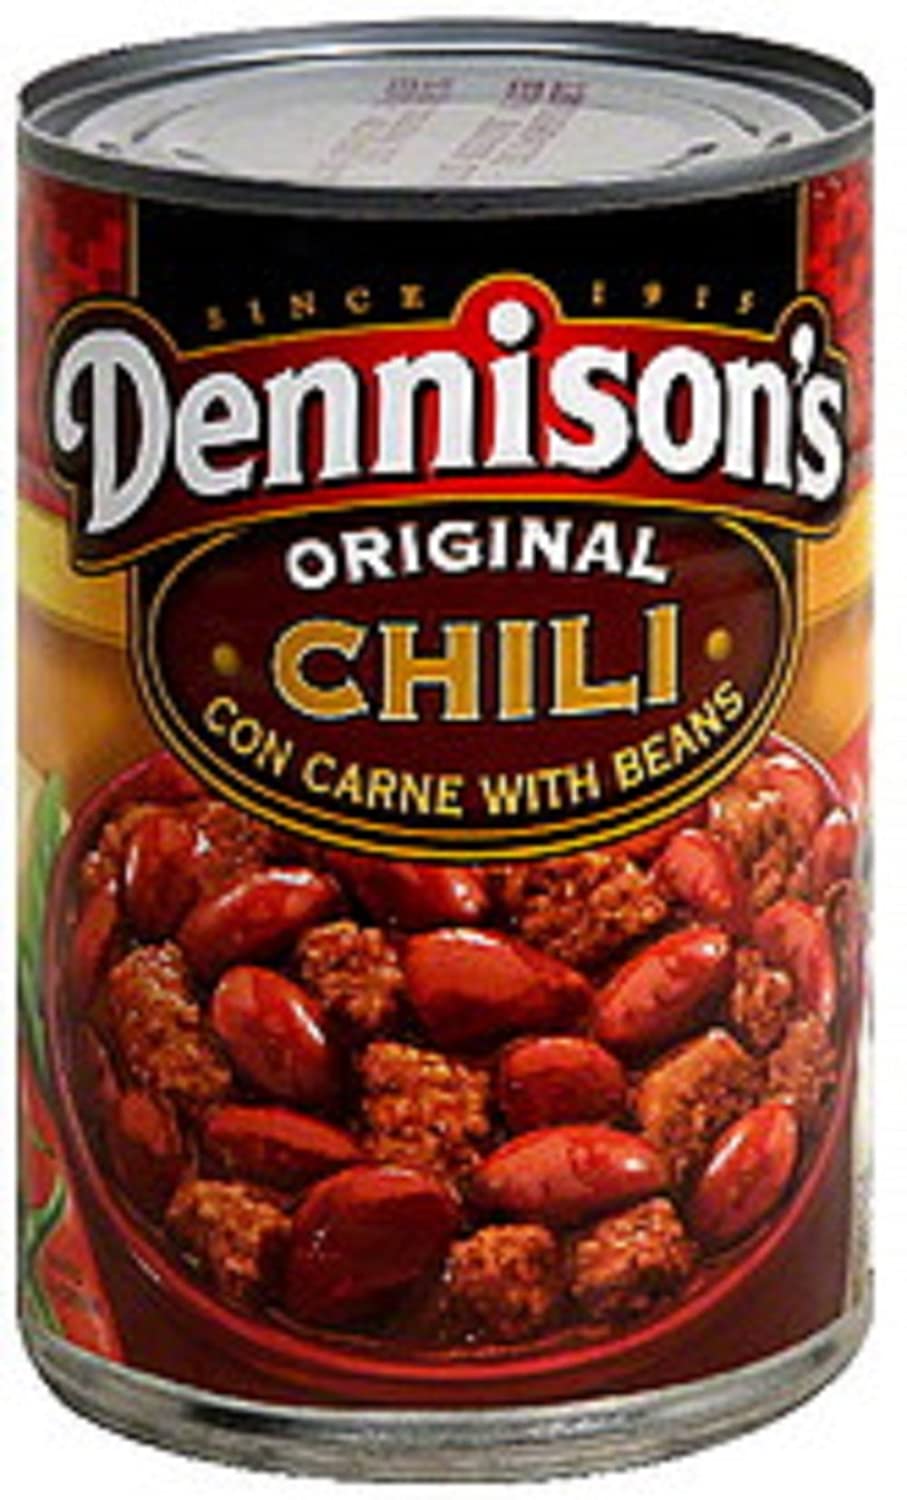 10 Best Canned Chili To Buy On Amazon to Make your Food Spicy (2023)